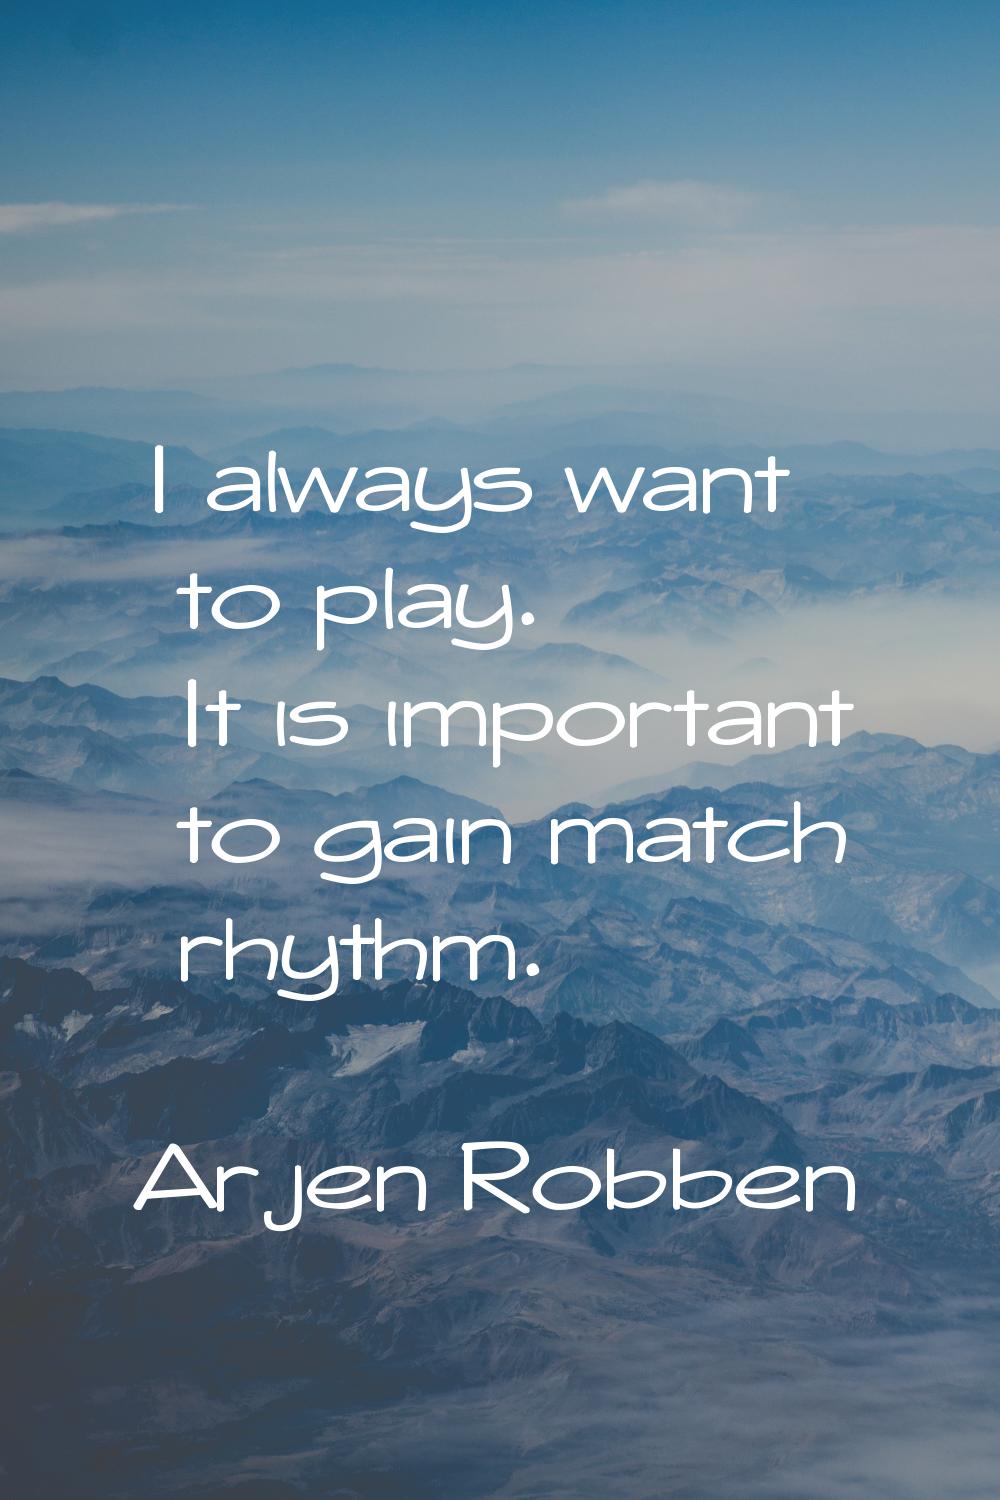 I always want to play. It is important to gain match rhythm.